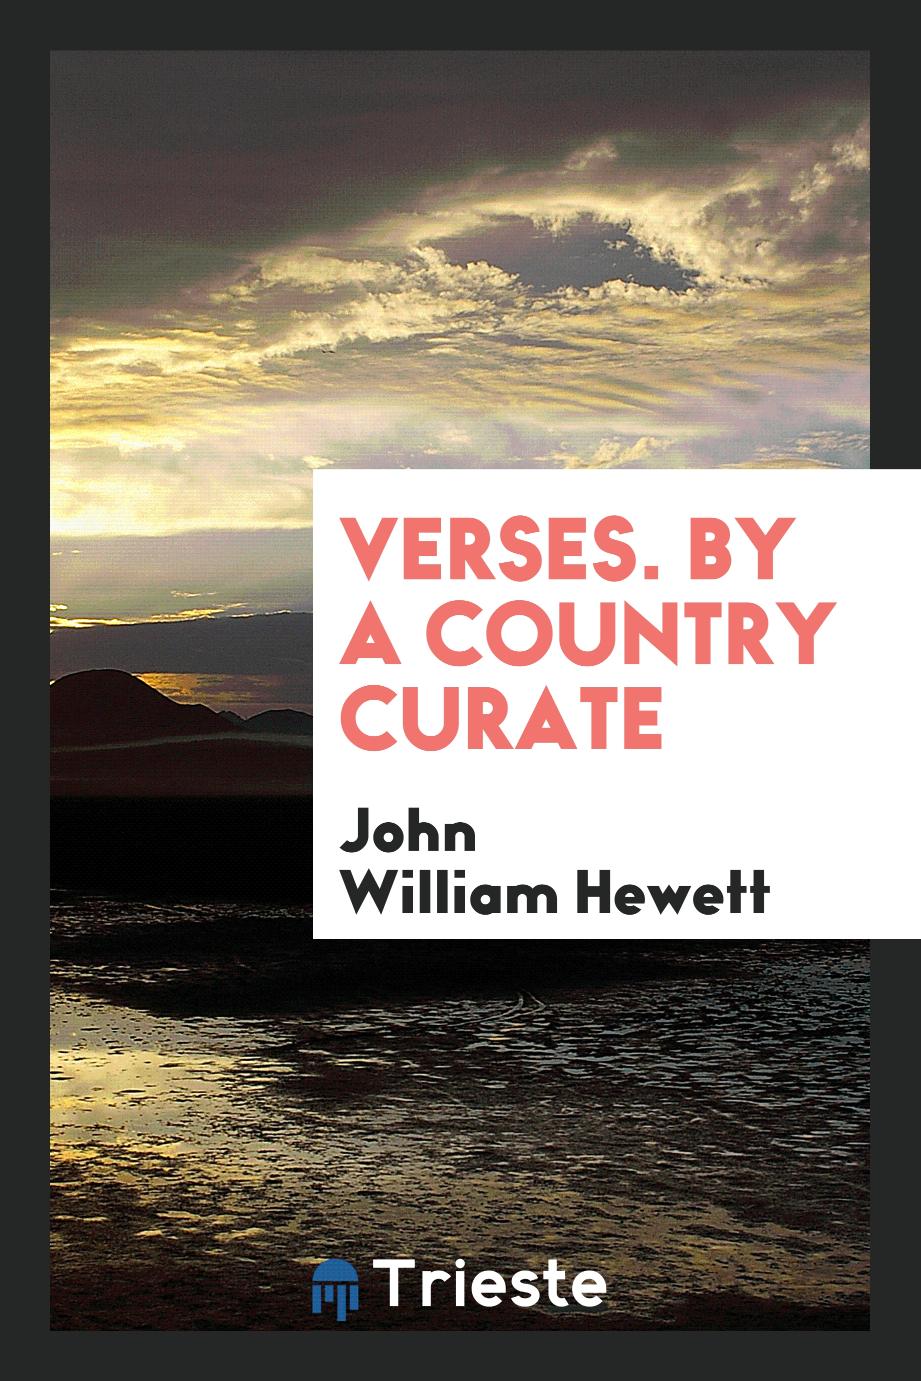 Verses. By a Country Curate